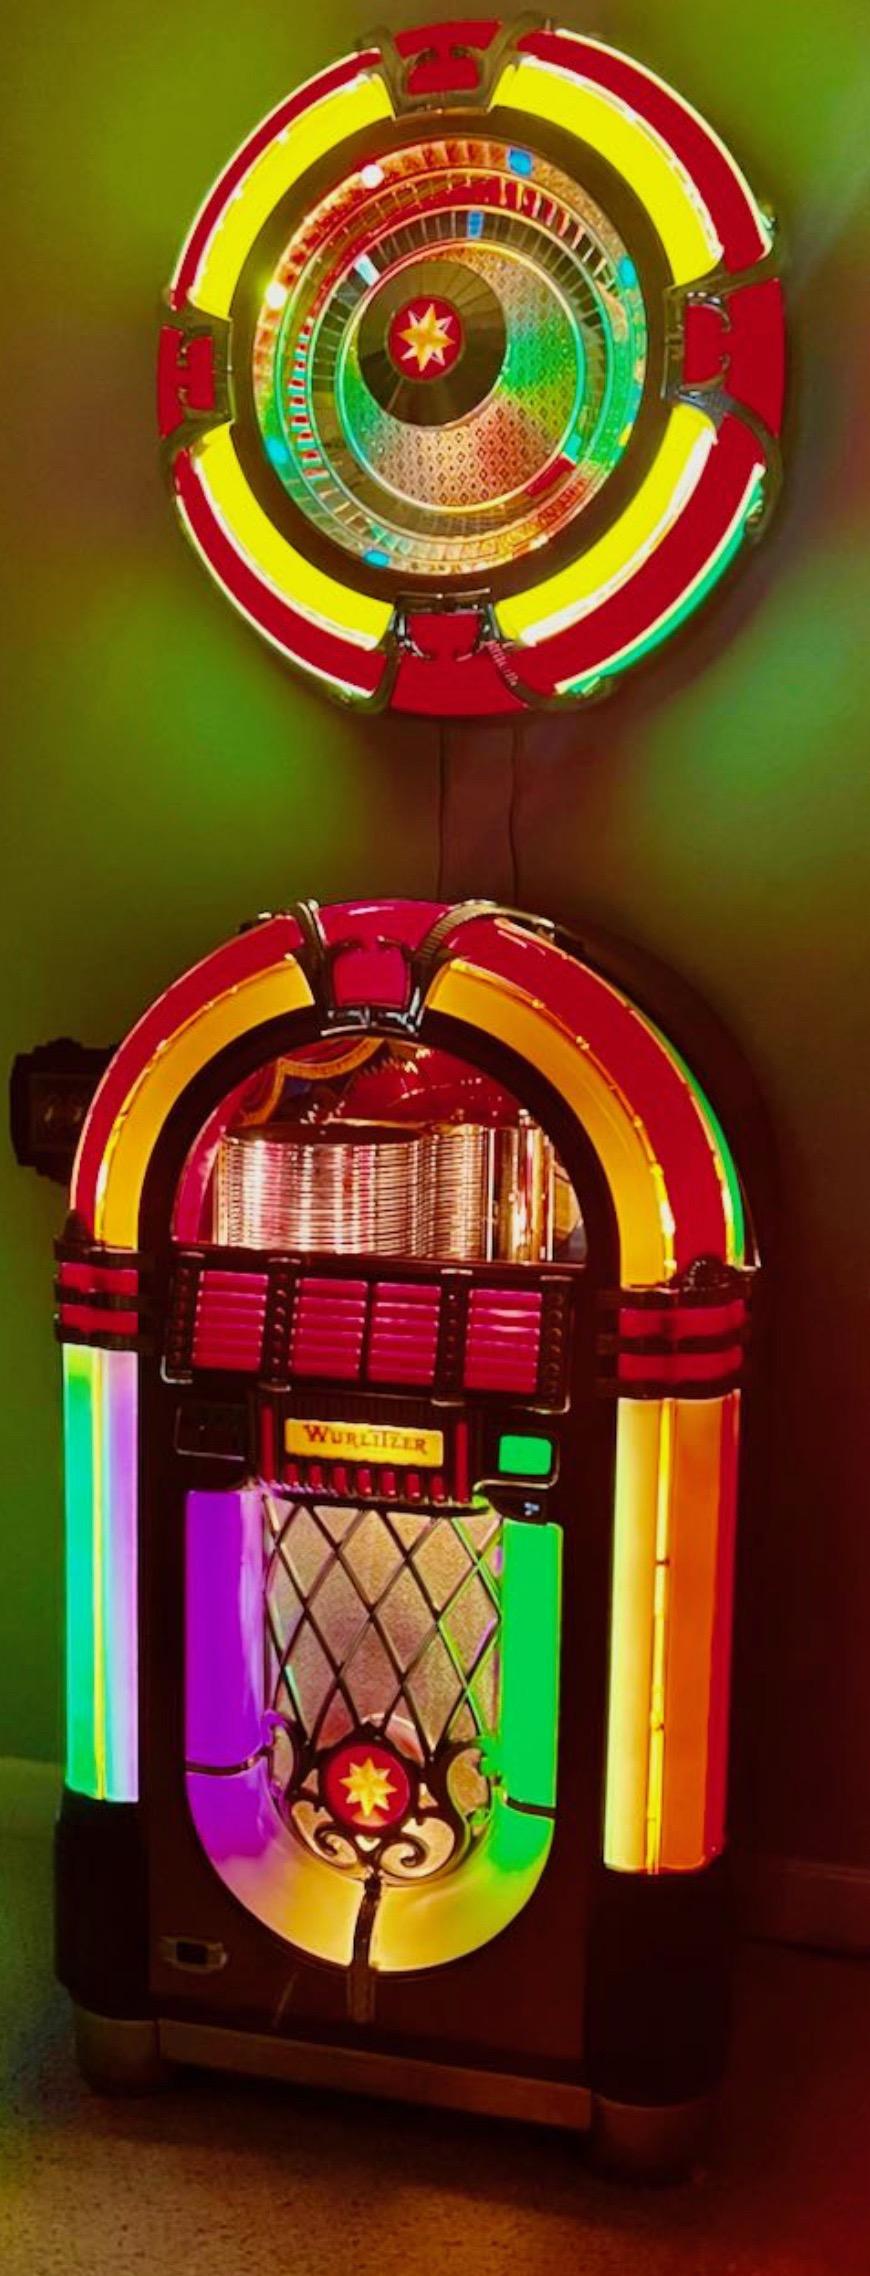 Wurlitzer Auxiliary #4008 Speaker Matches JukeBox. Rare 1946 Wurlitzer Jukebox 4000 bubbler. External speaker designed for the famed classic 1015 Wurlitzer Jukebox Amazing original condition, this is a reproduction, not available today but does